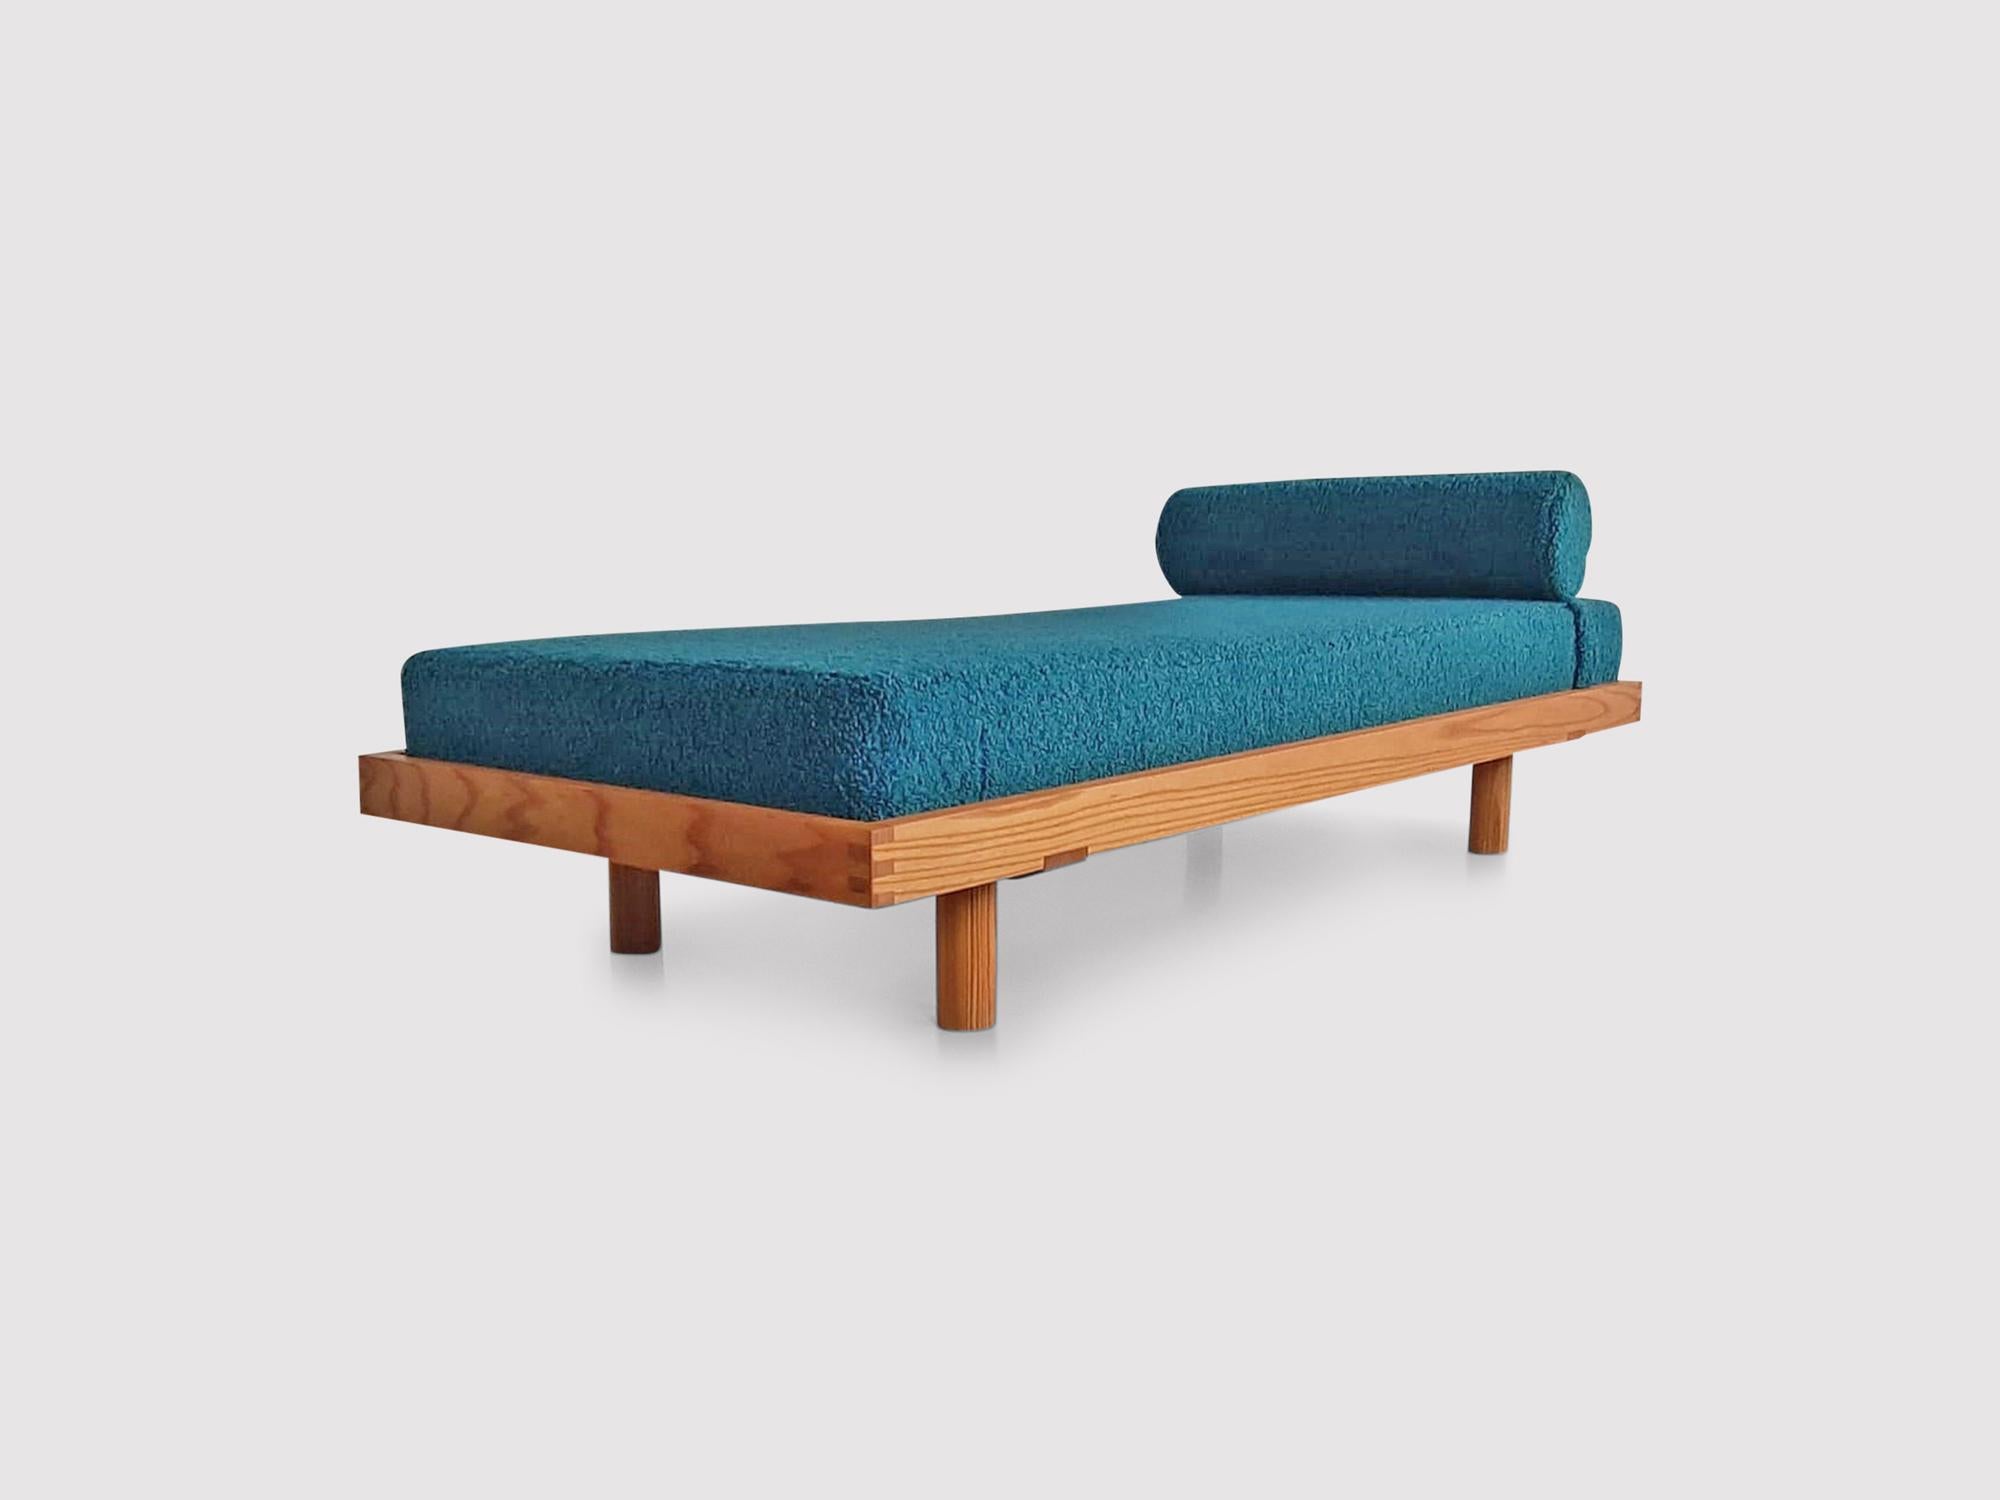 Pierre Chapo’s L01 E daybed, a design that was commissioned in 1959 by Samuel Beckett in reference to his play entitled Attendant Godot. Bed of great elegance is a pure design approaching that of Charlotte Perriand and Jean Prouvé.

The daybed is